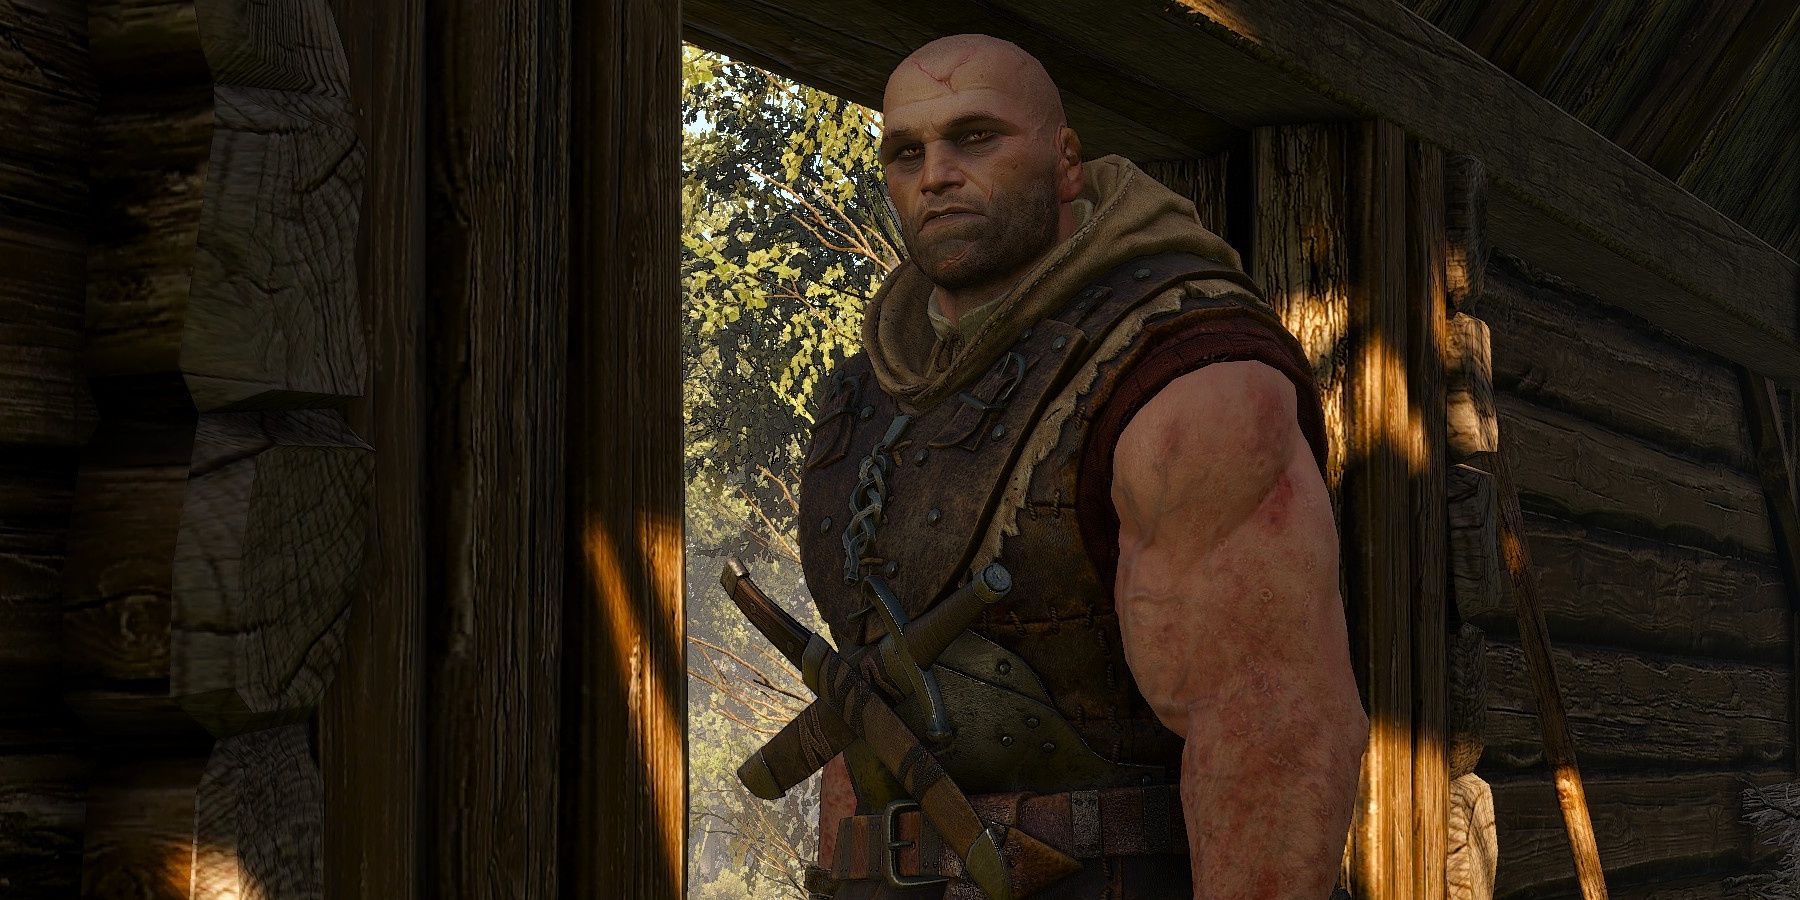 Letho In The Witcher 3 after meeting with geralt